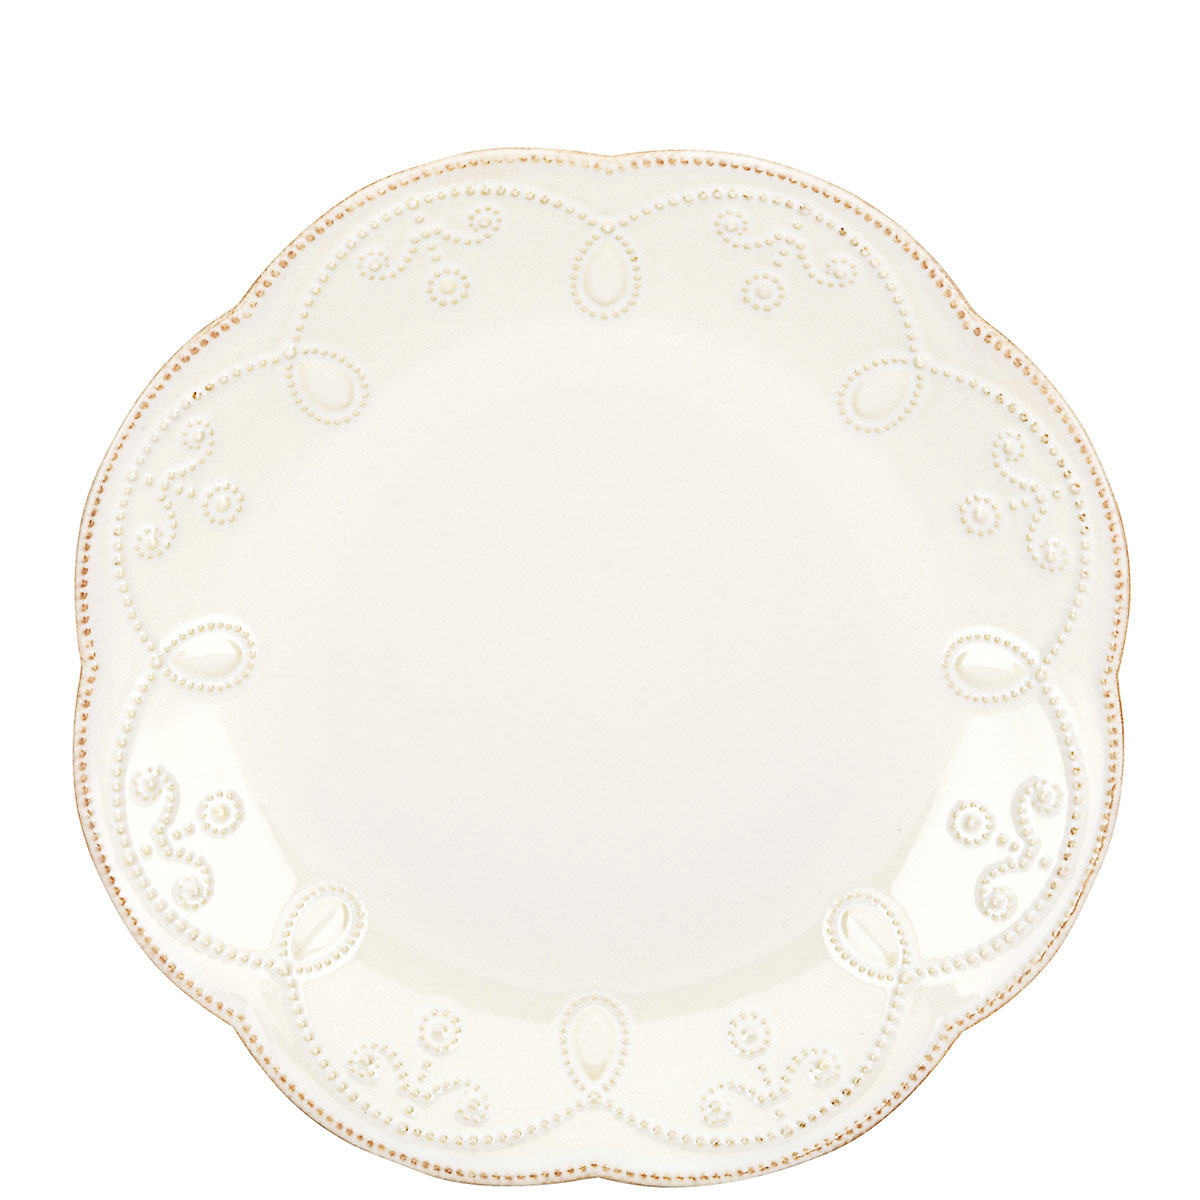 Lenox French Perle White Dinnerware Accent Plate 9"